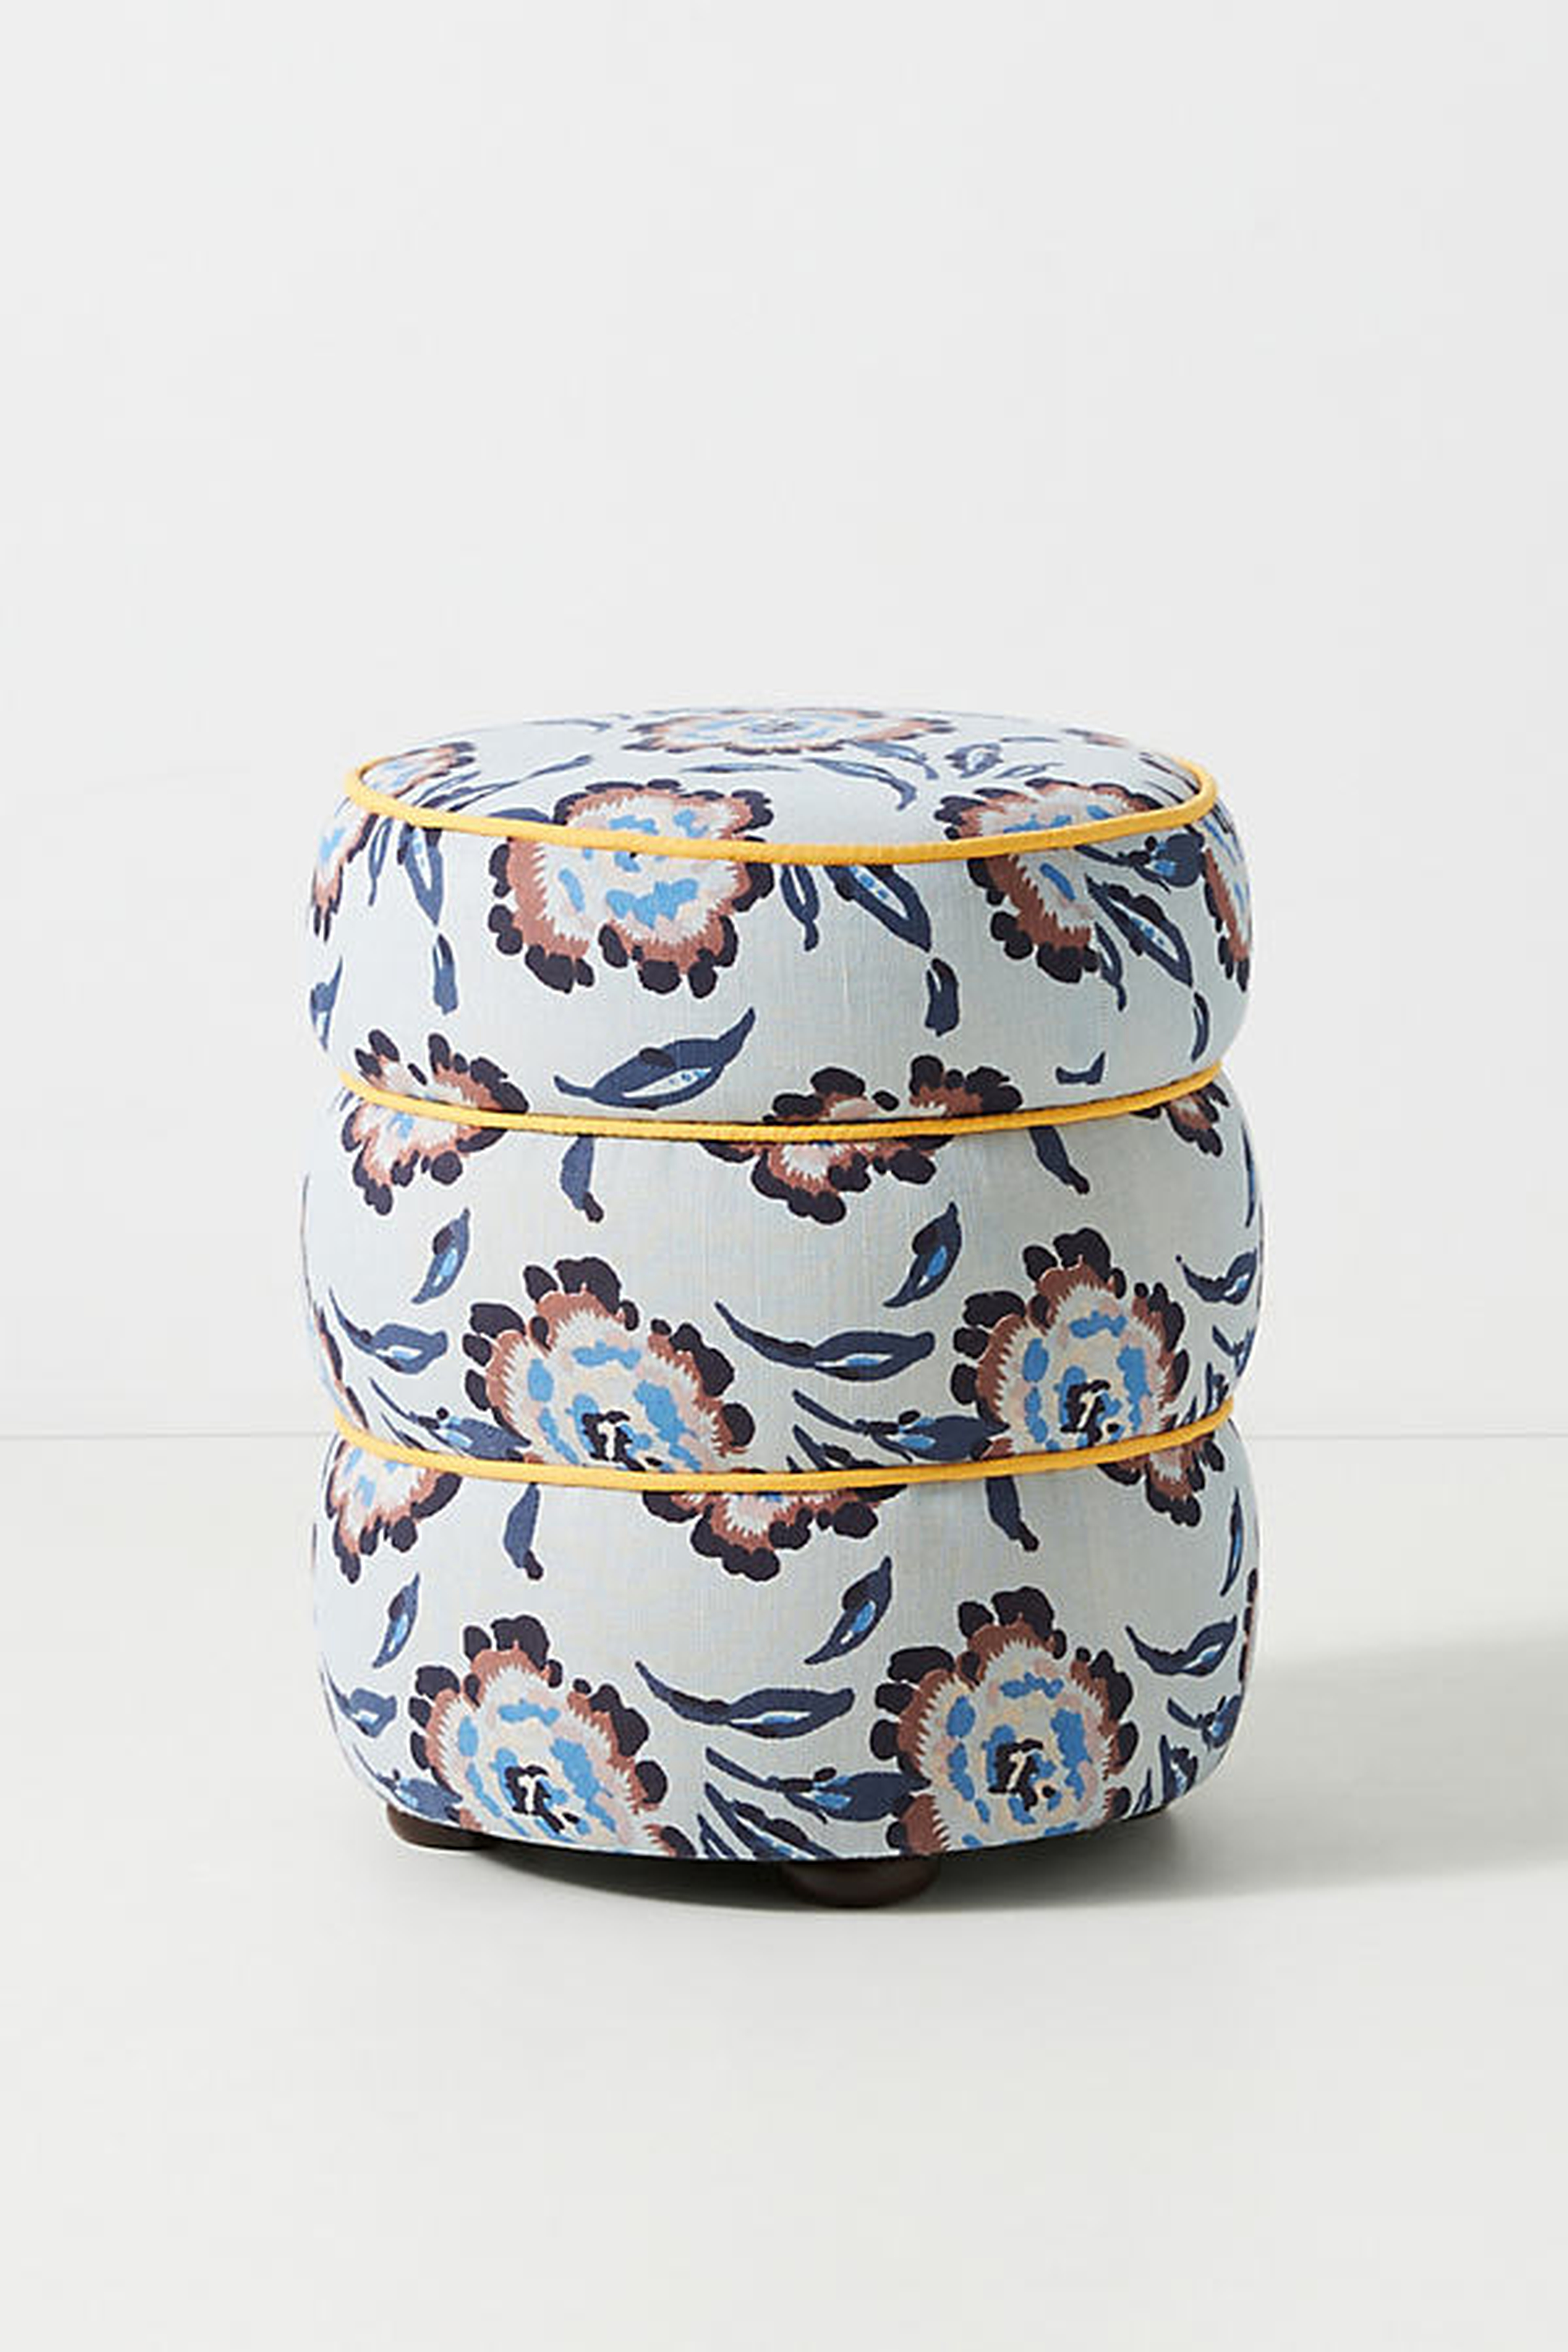 Rayla Storage Ottoman By Anthropologie in Blue - Anthropologie